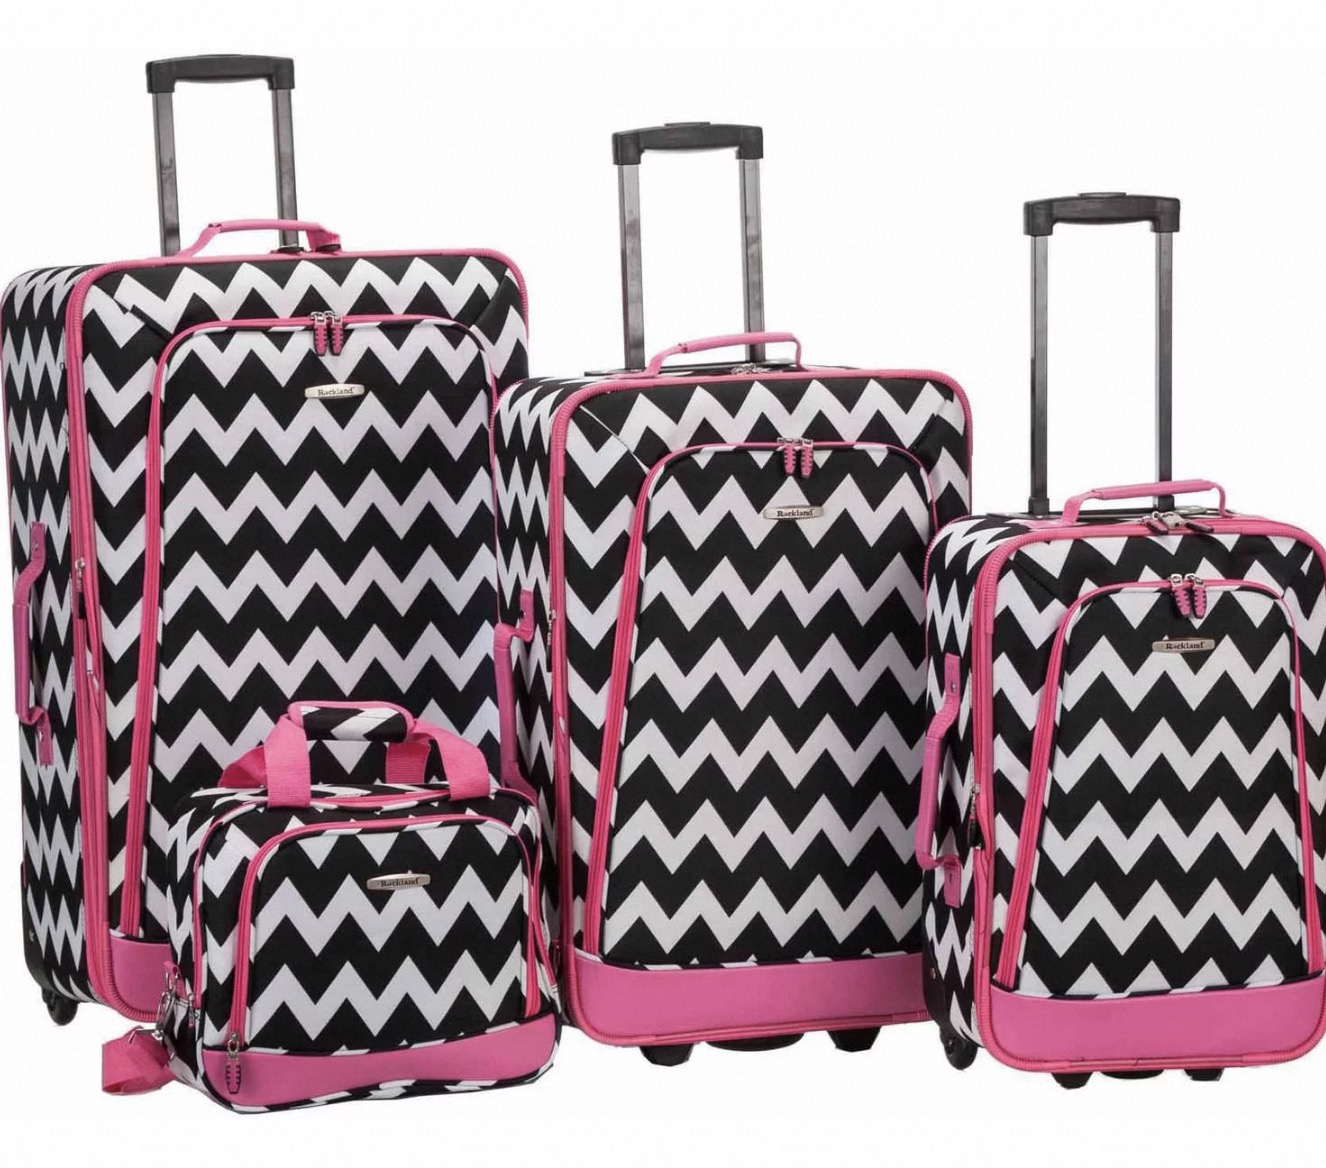 Walmart Luggage: Your Gateway to Affordable Quality Travel Gear